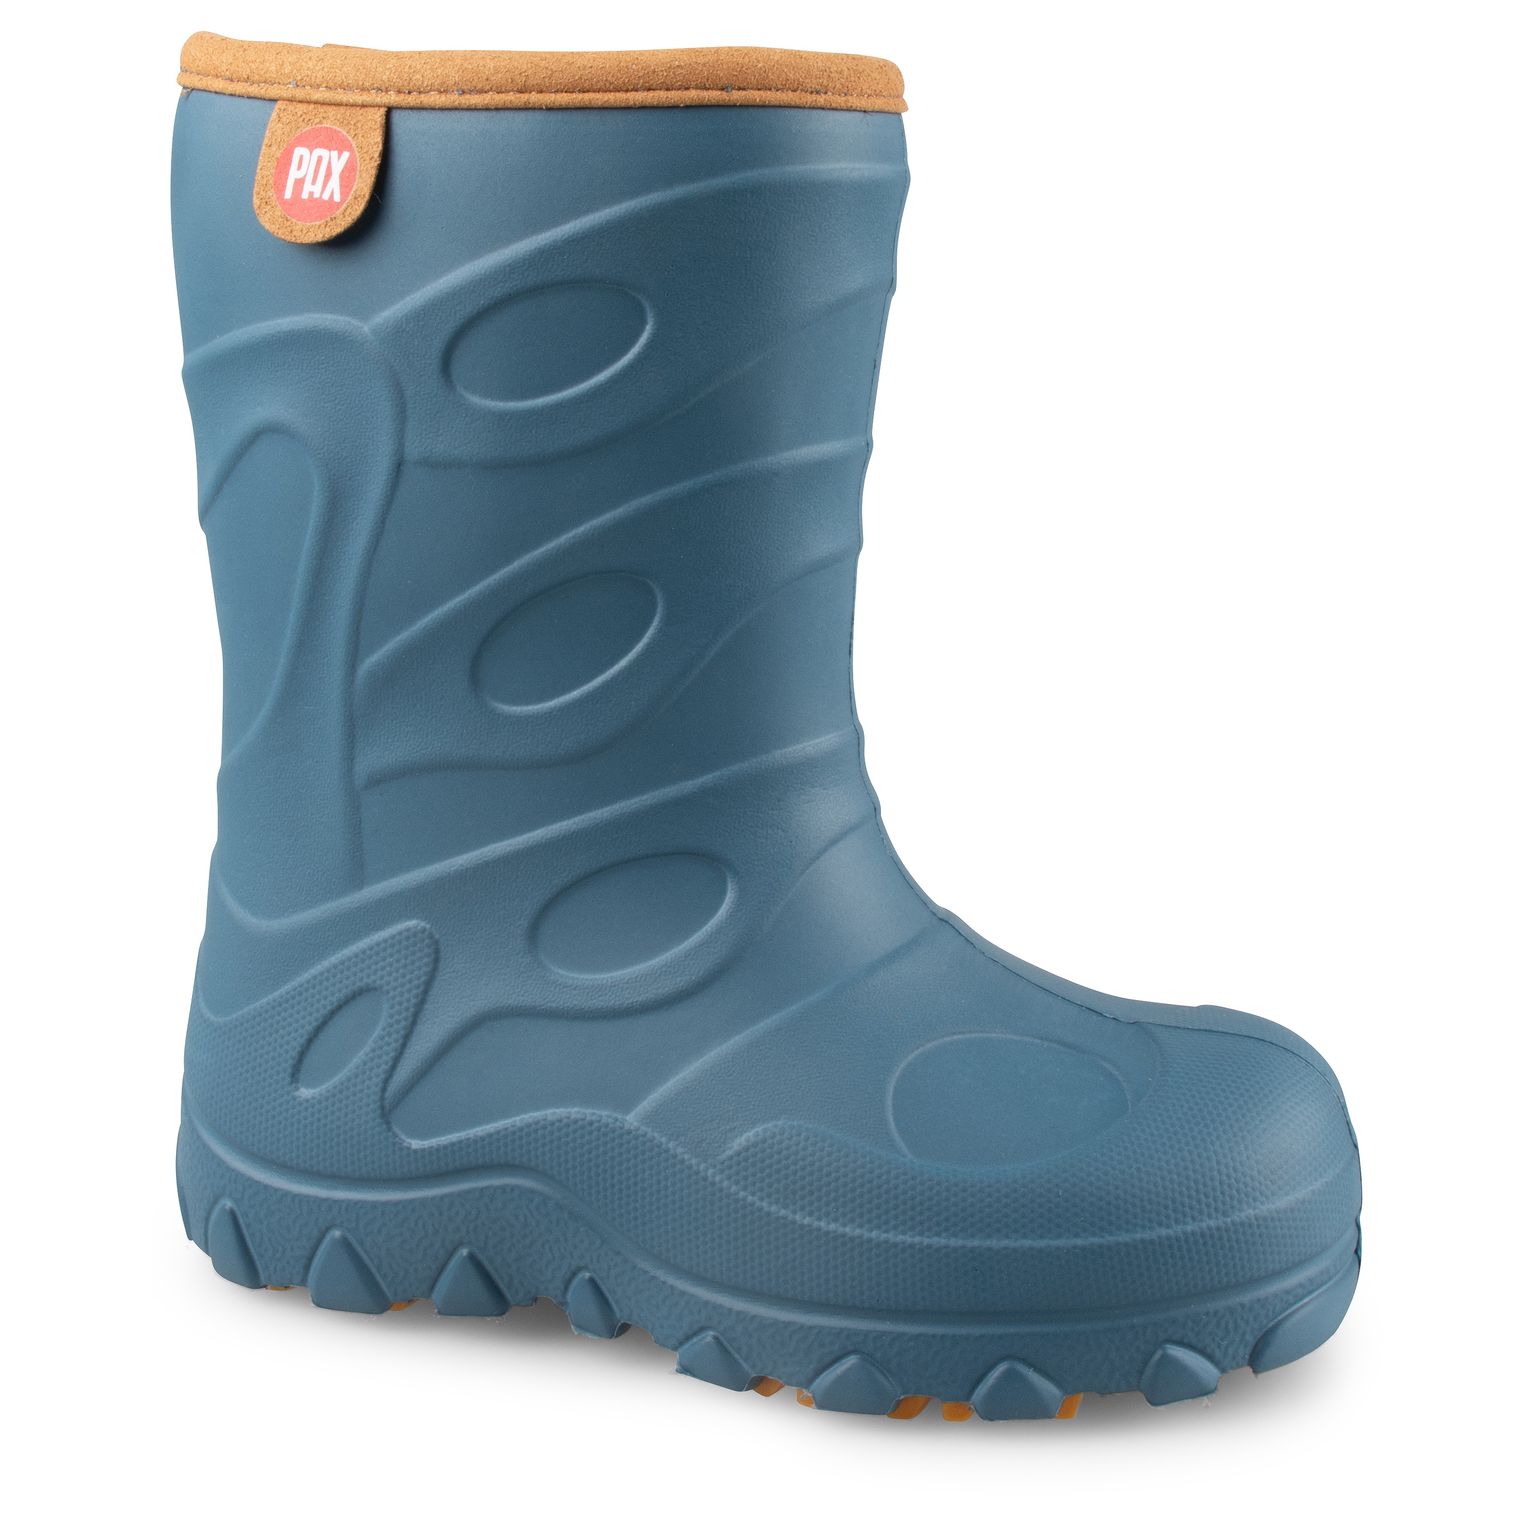 Pax Kids' Inso Rubber Boot Steel blue